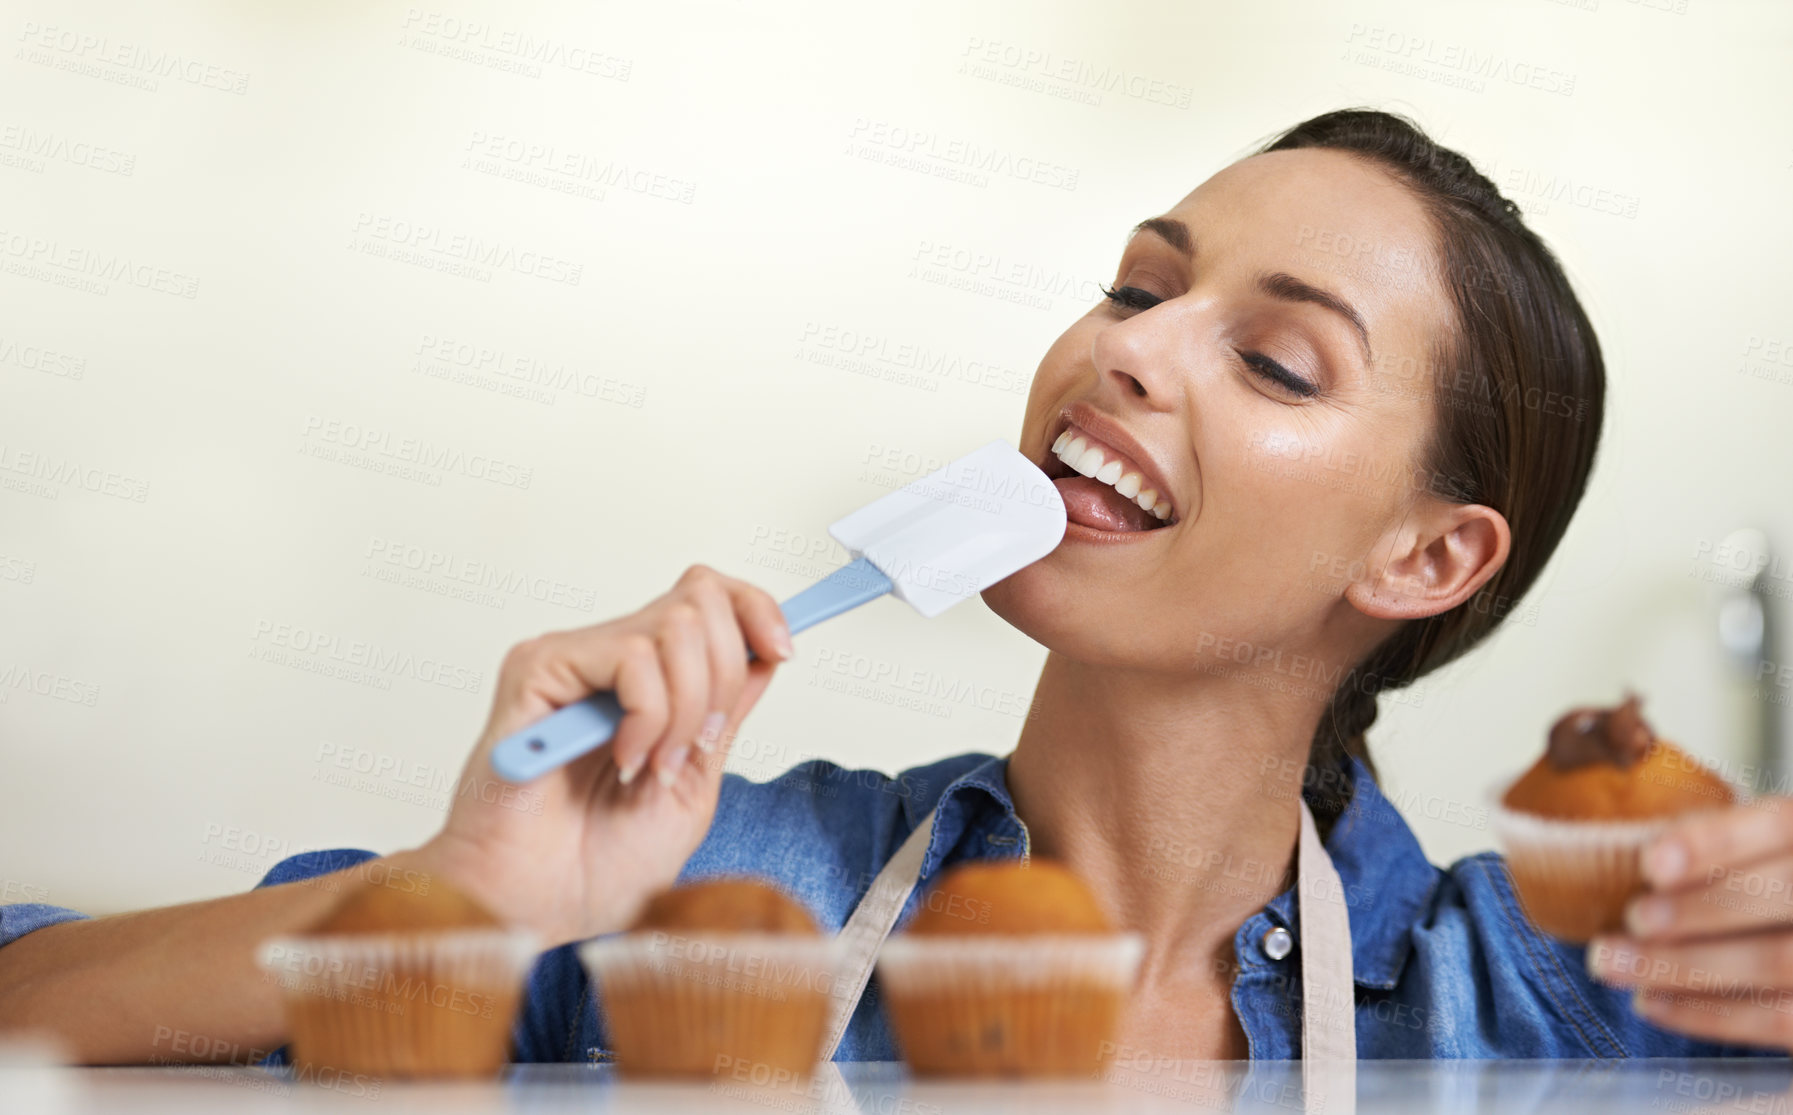 Buy stock photo Baking, cupcakes and woman with spatula in kitchen tasting sweet chocolate frosting for dessert. Cooking, eating and young female baker working on muffins and licking tool at home or apartment.